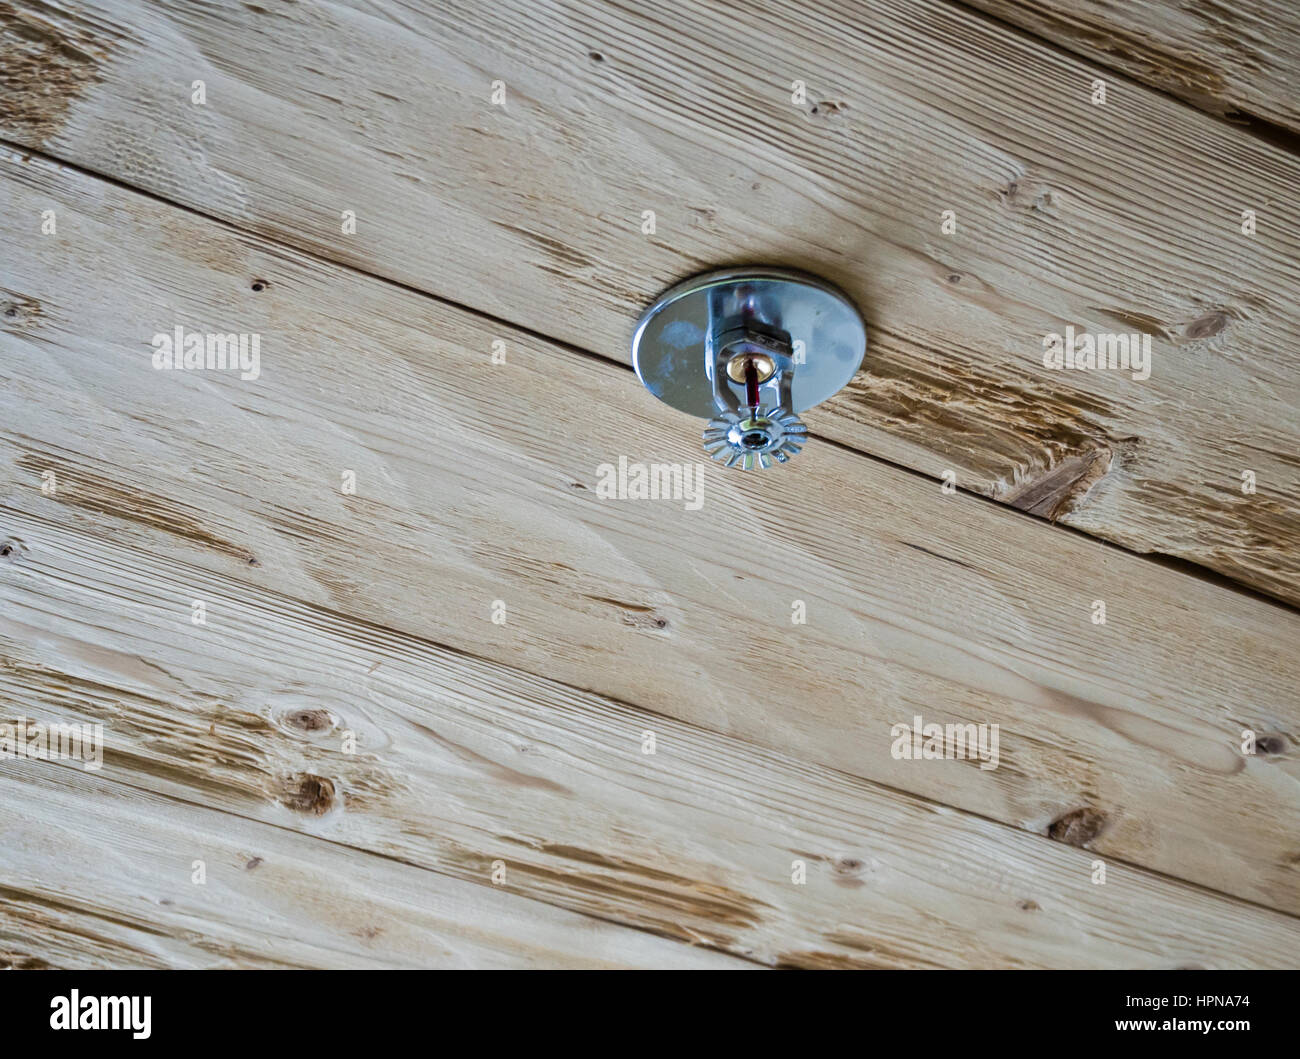 Sprinkler system installed on a flammable wooden ceiling of a wooden house / cabin Stock Photo